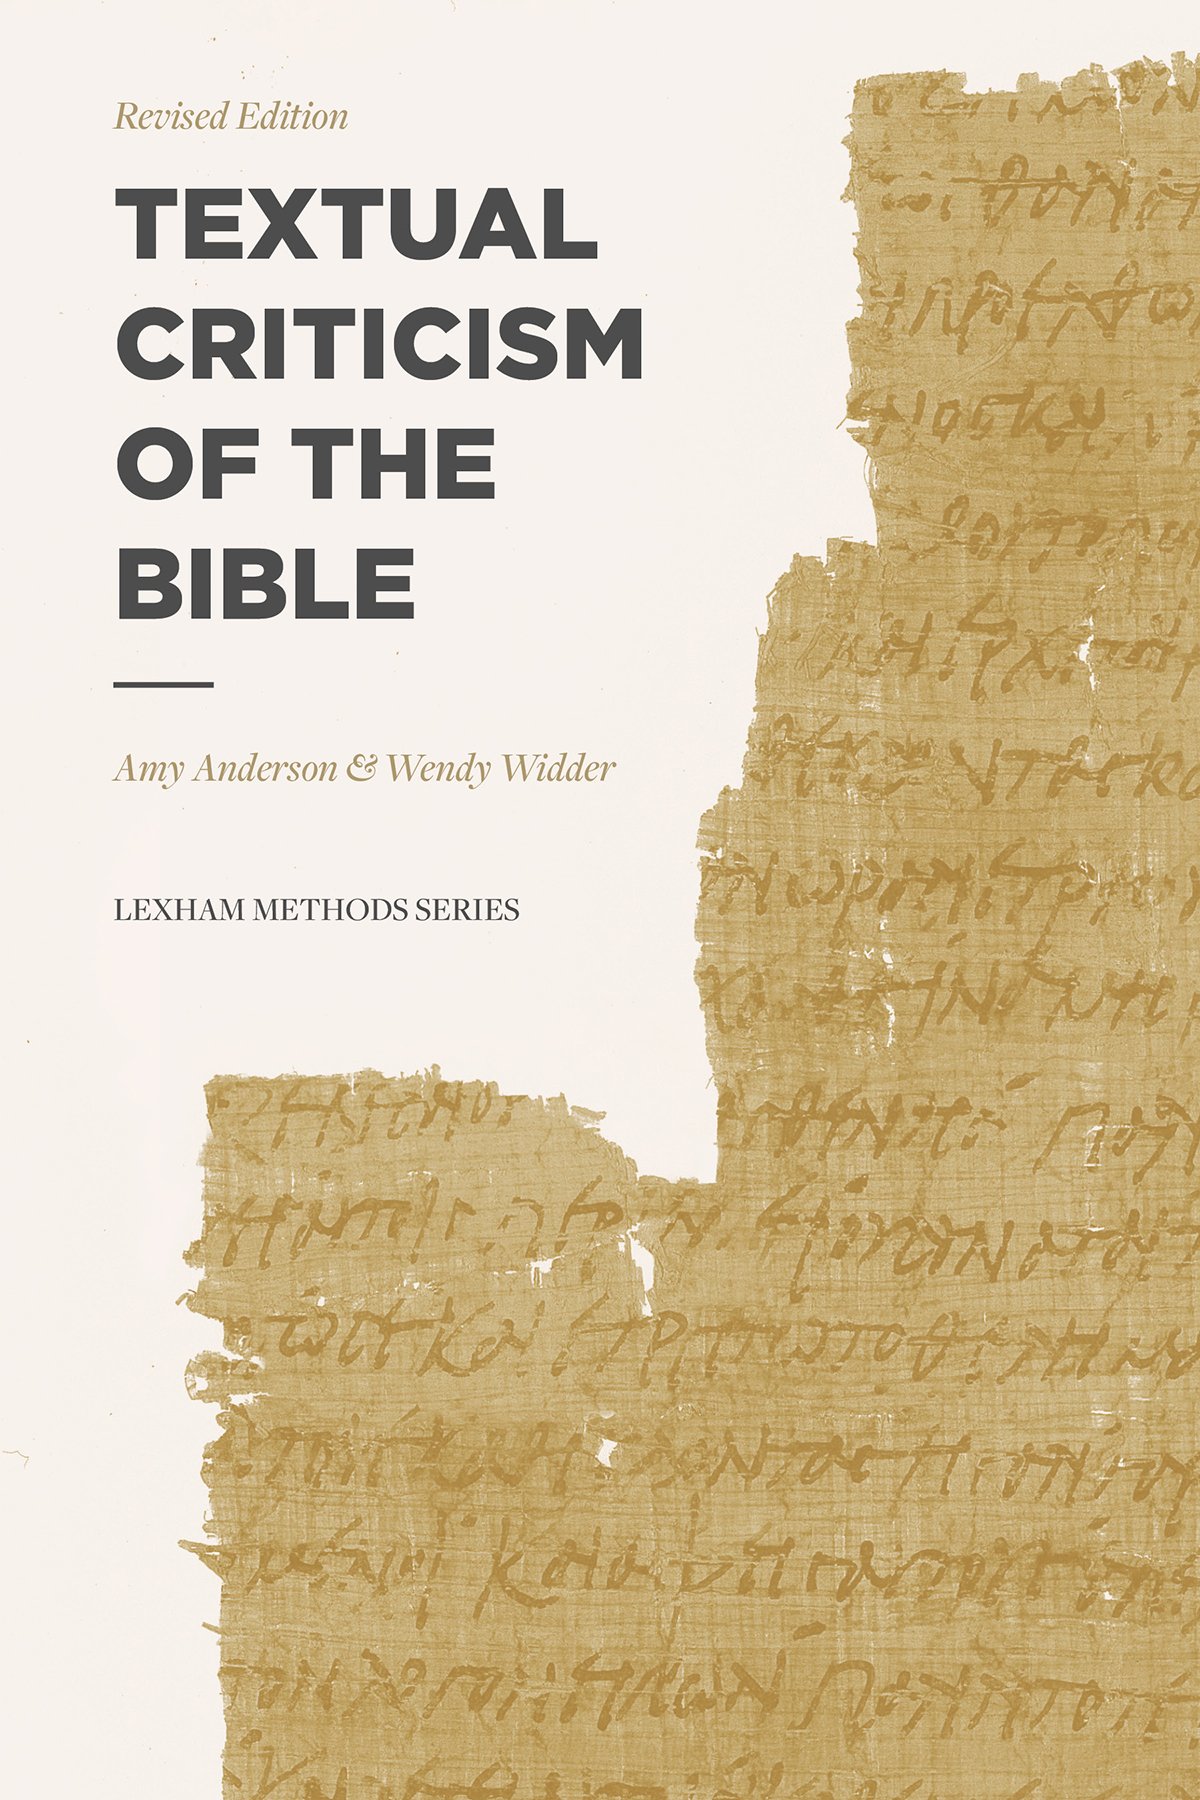 Book Notice: TEXTUAL CRITICISM OF THE BIBLE (LEXHAM METHODS SERIES), by Amy Anderson and Wendy Widder